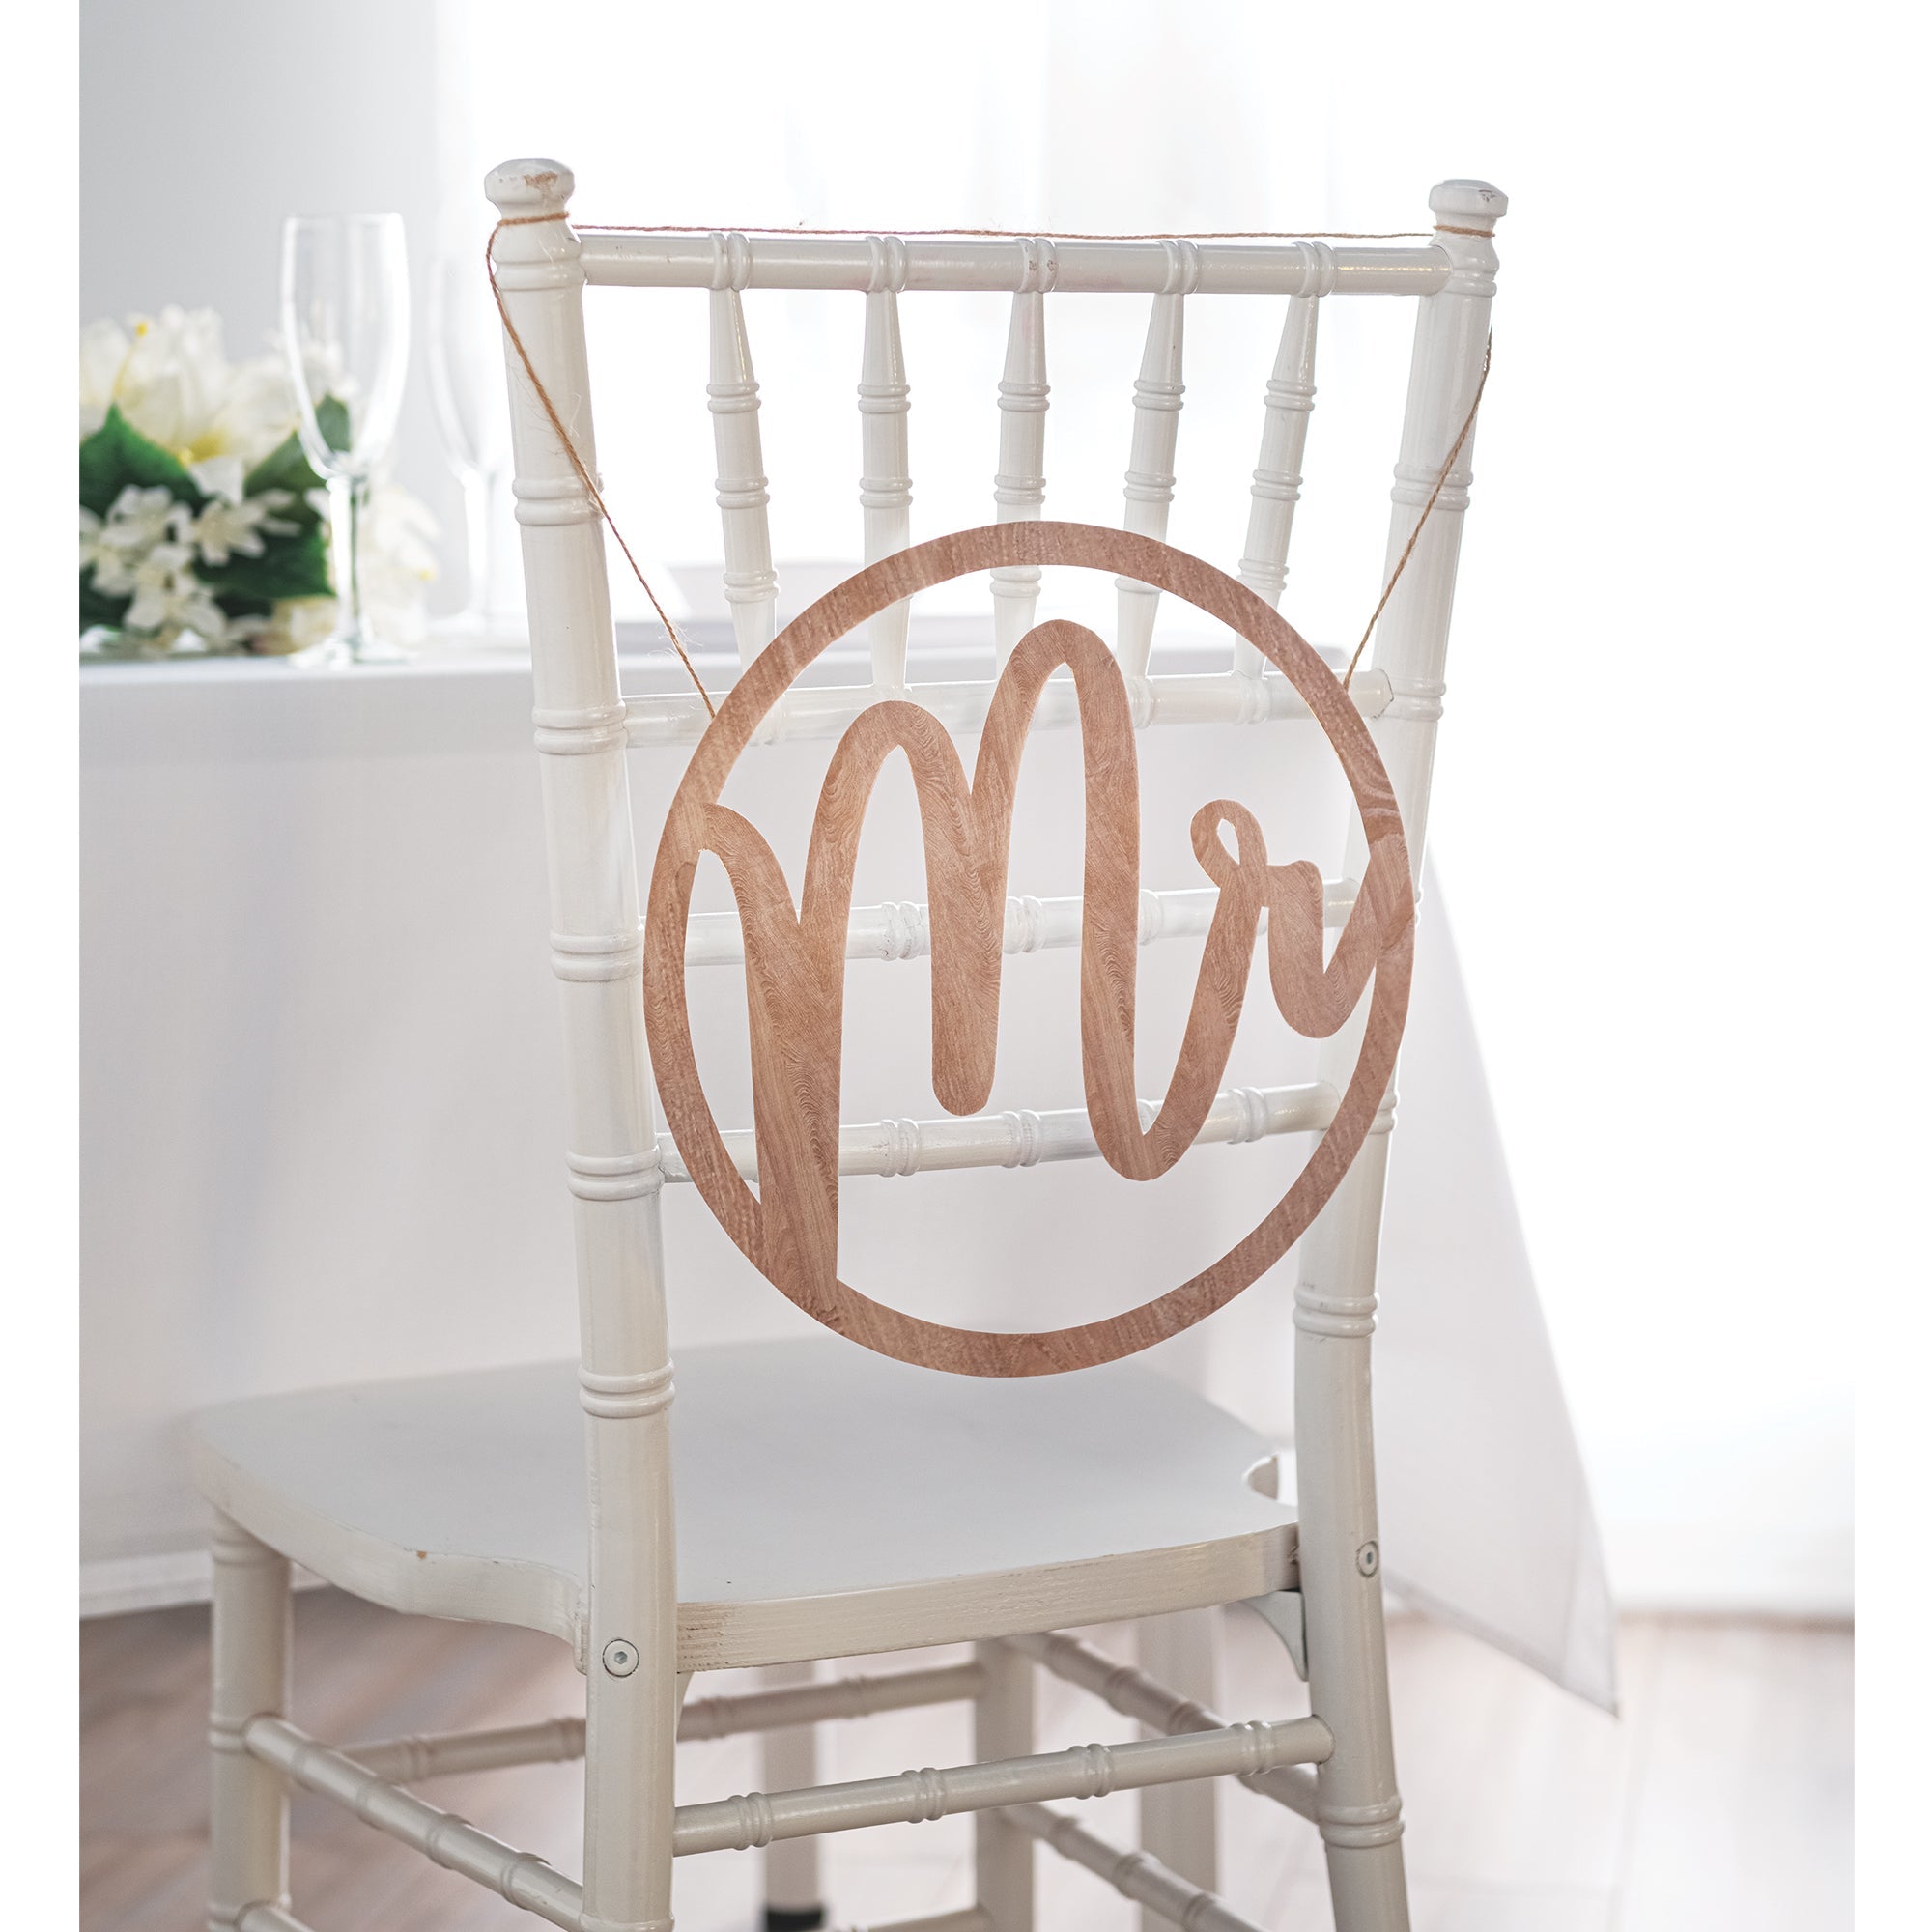 Mr. Chair 11 1/2" Hanging Chair Sign